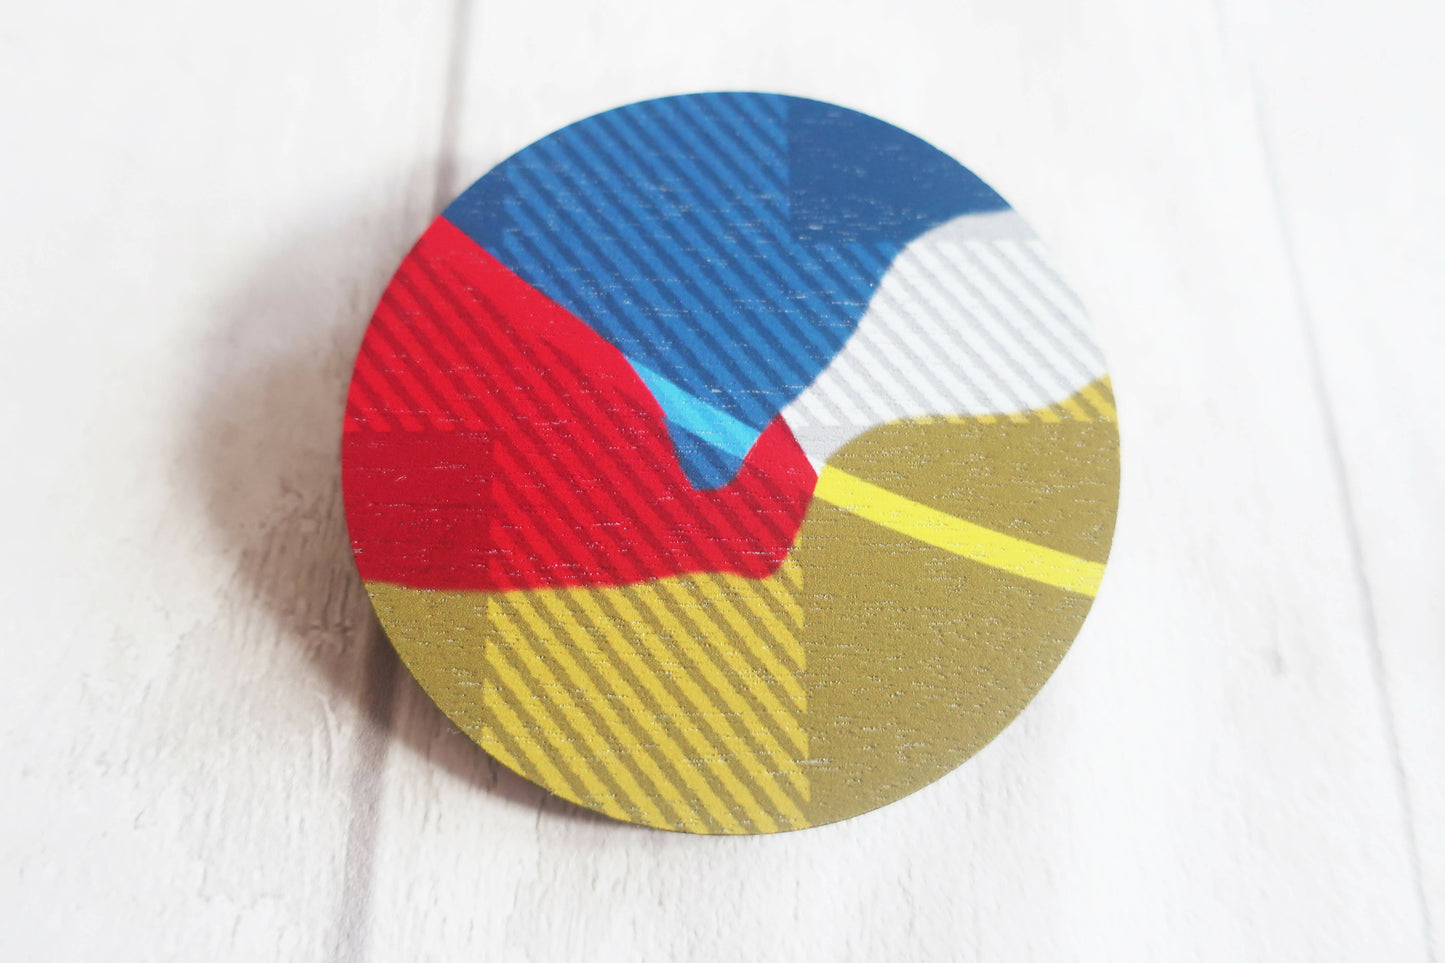 Large abstract statement brooch, colourful printed pin